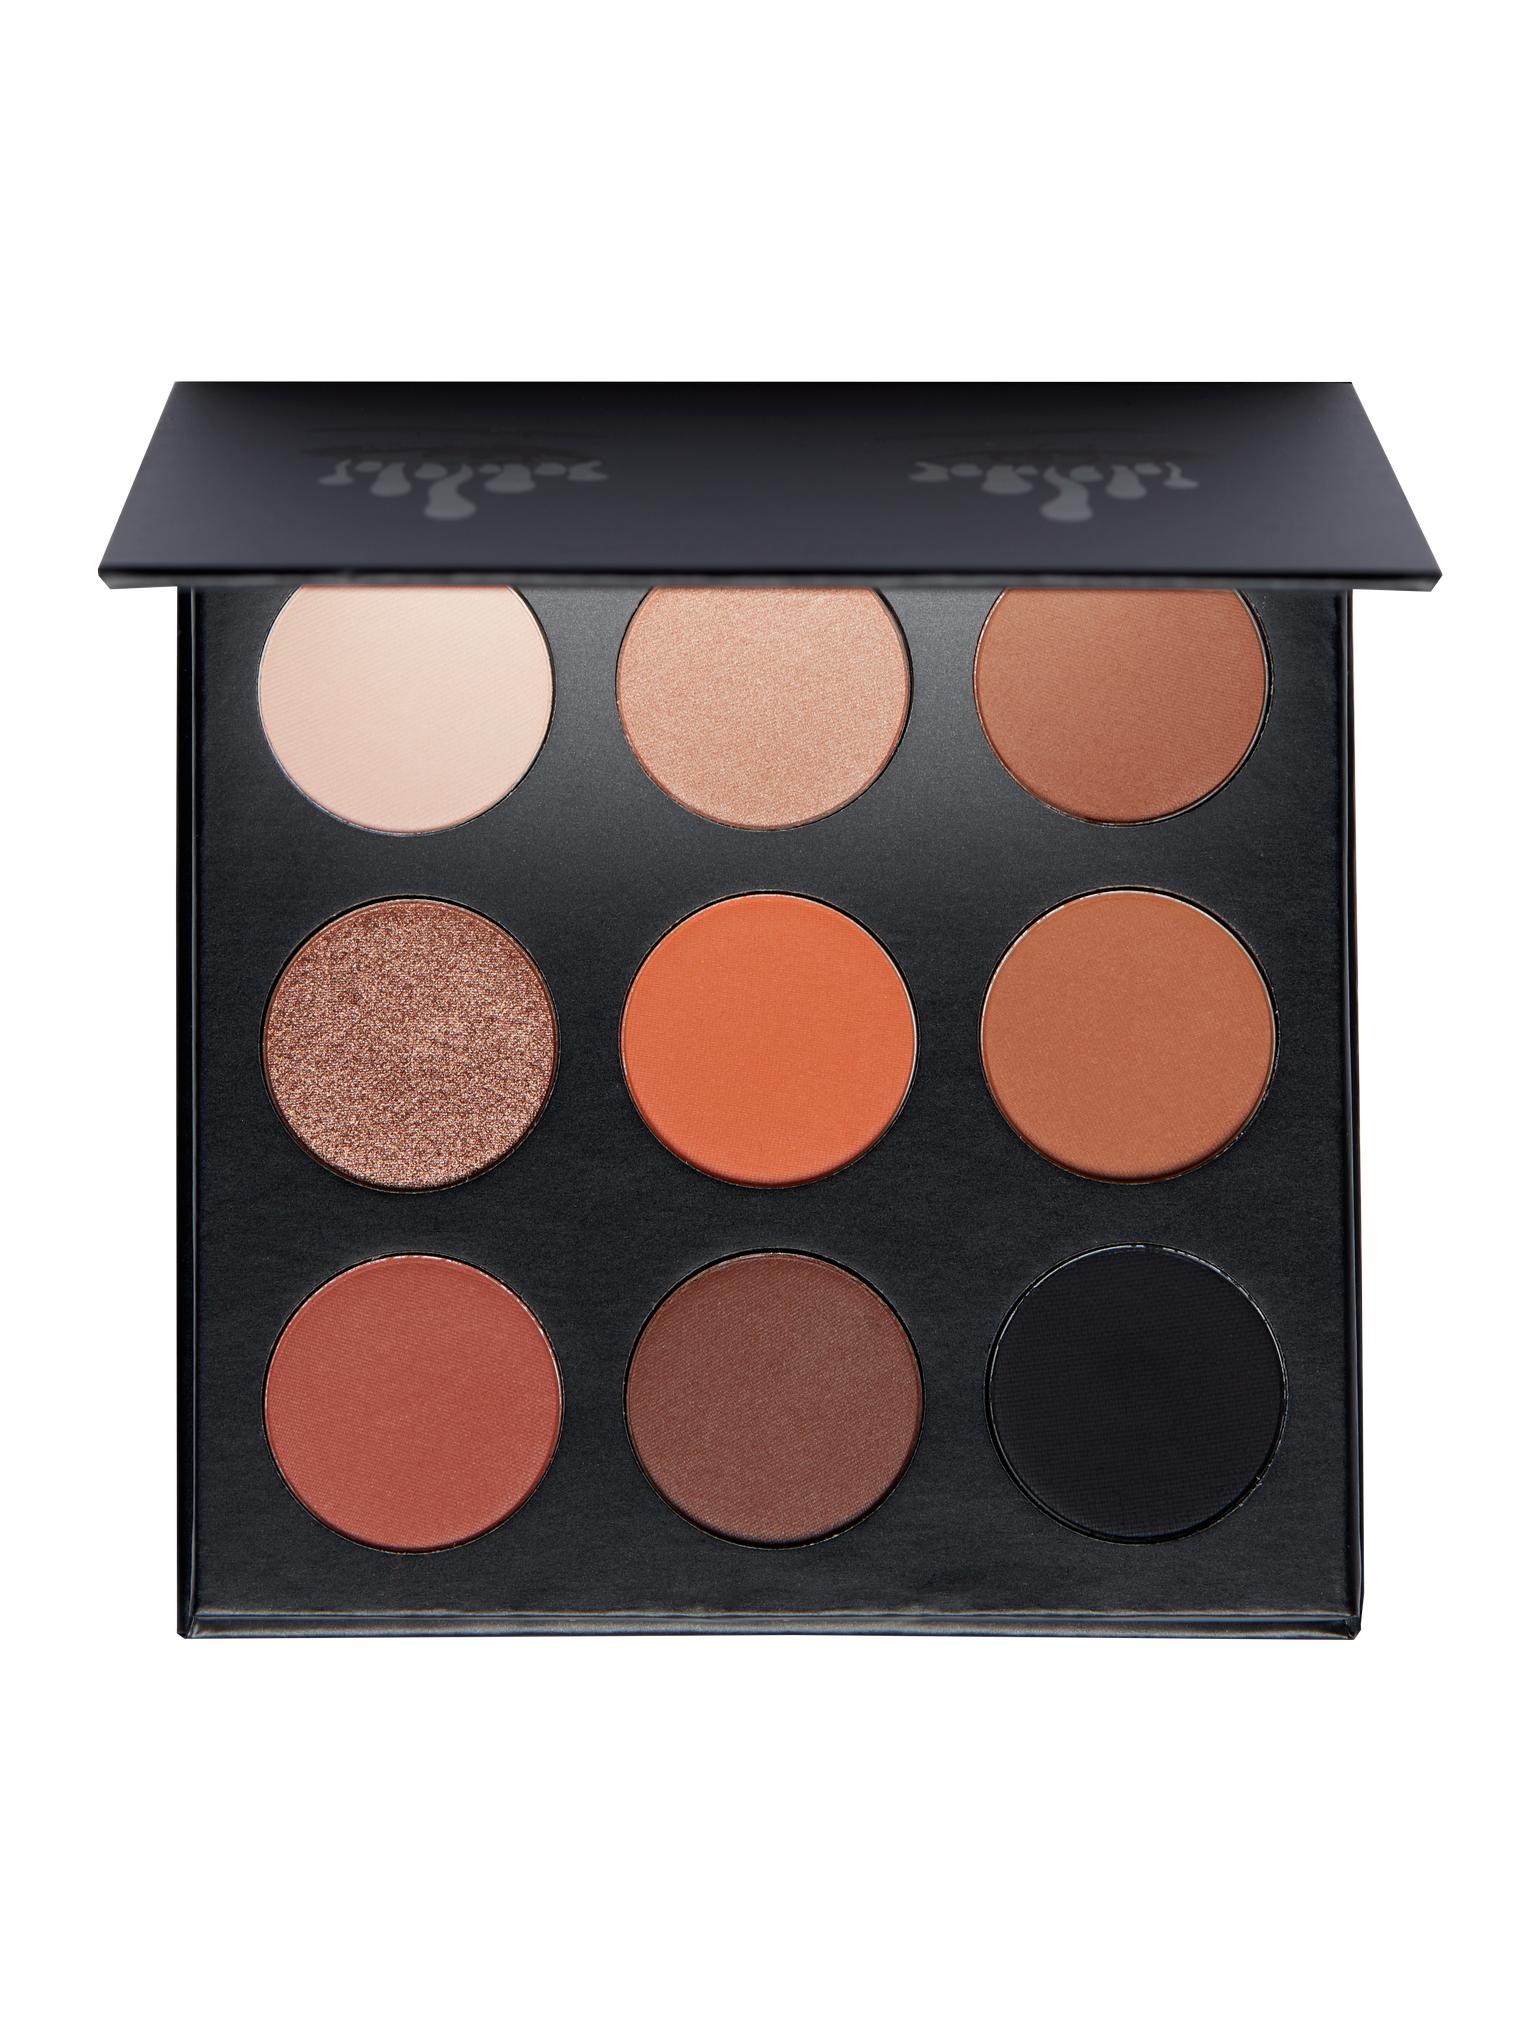 Image of The Bronze Palette | Kyshadow